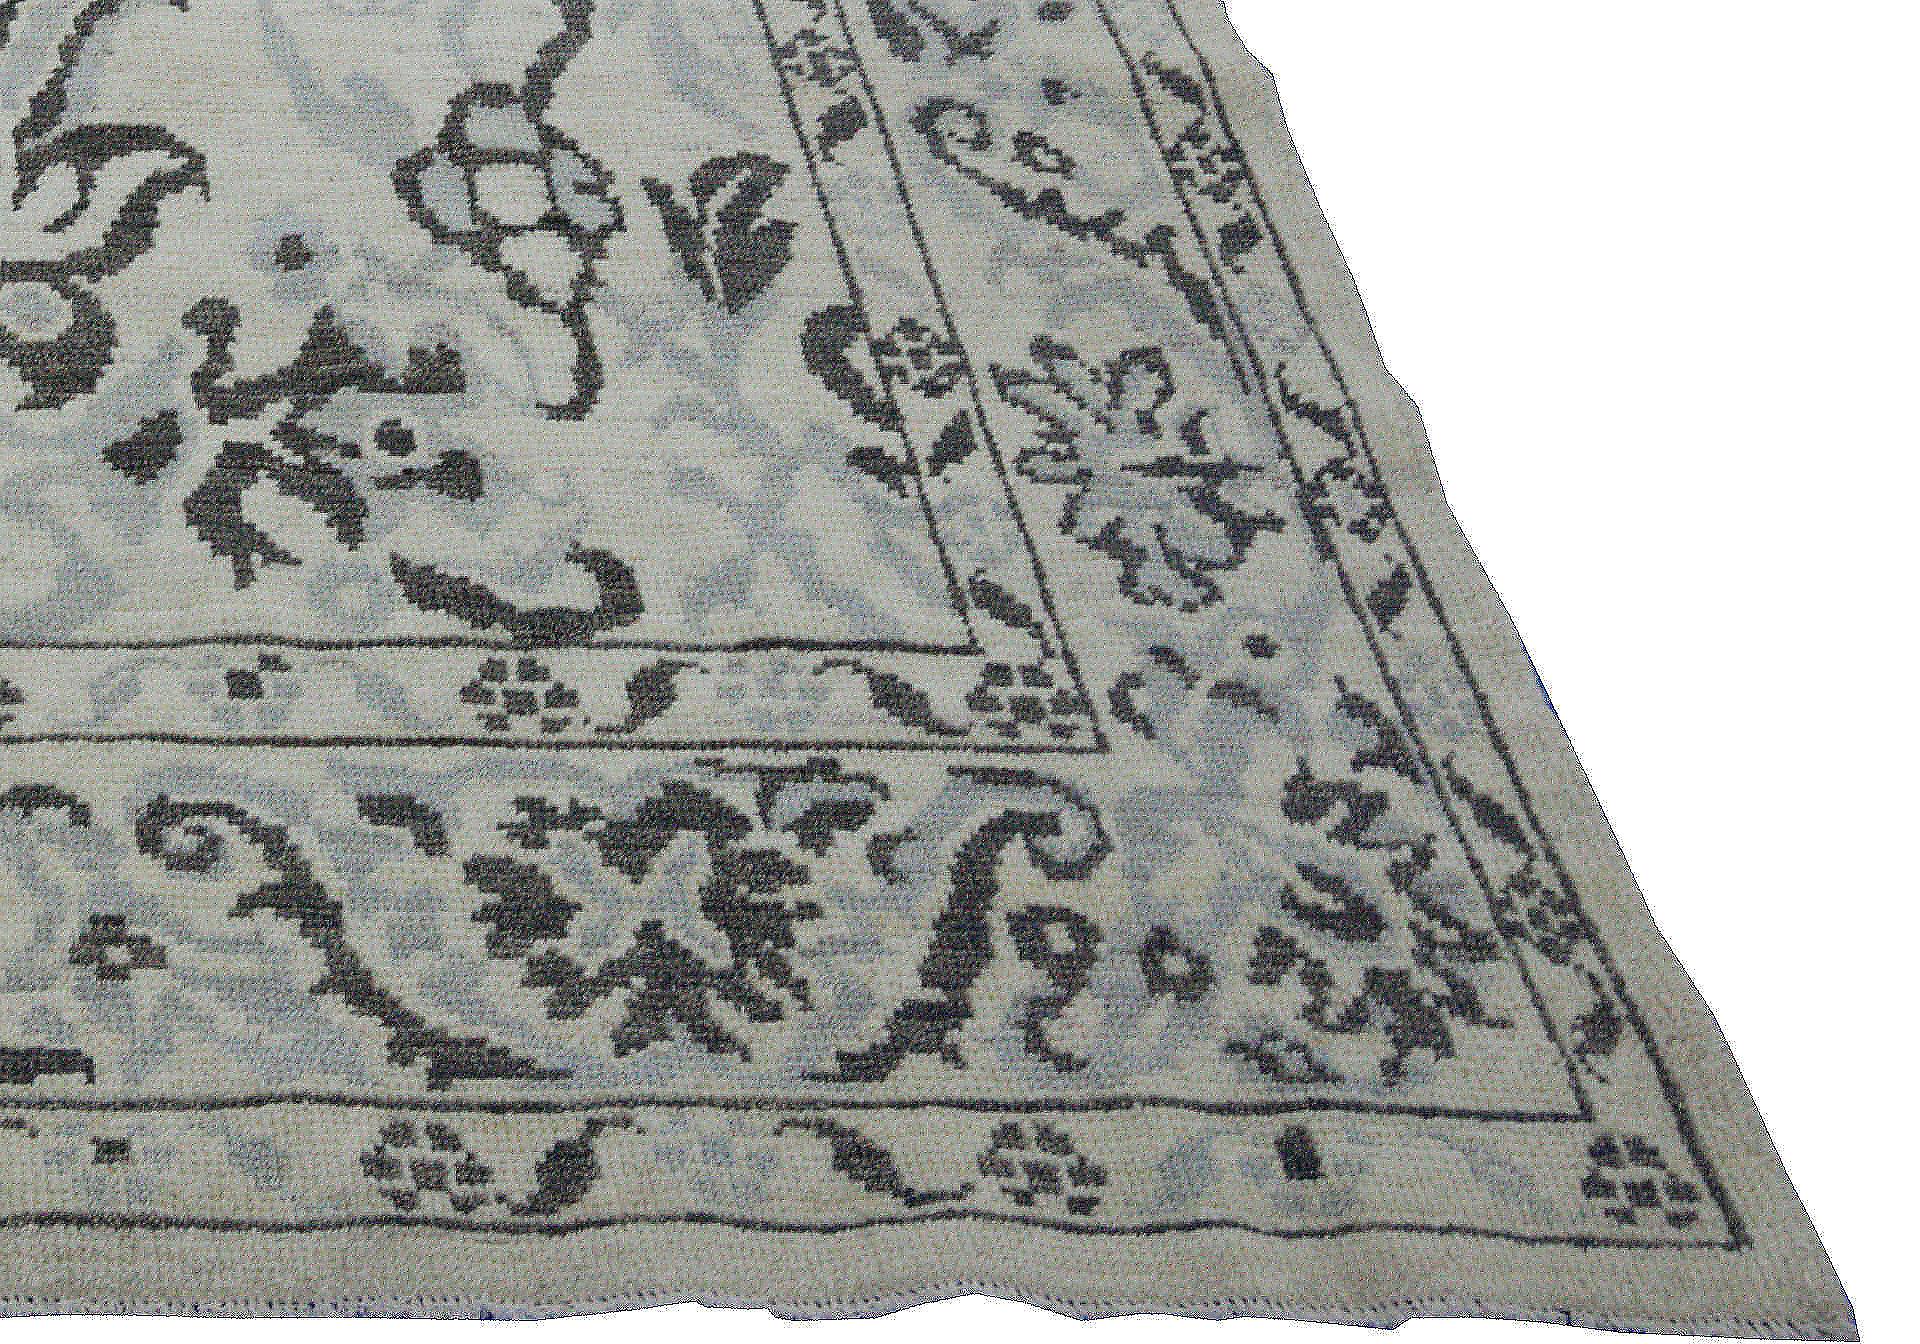 Contemporary Turkish rug made of handwoven sheep’s wool of the finest quality. It’s colored with organic vegetable dyes that are certified safe for humans and pets alike. It features an ivory field with black and gray floral patterns identified with